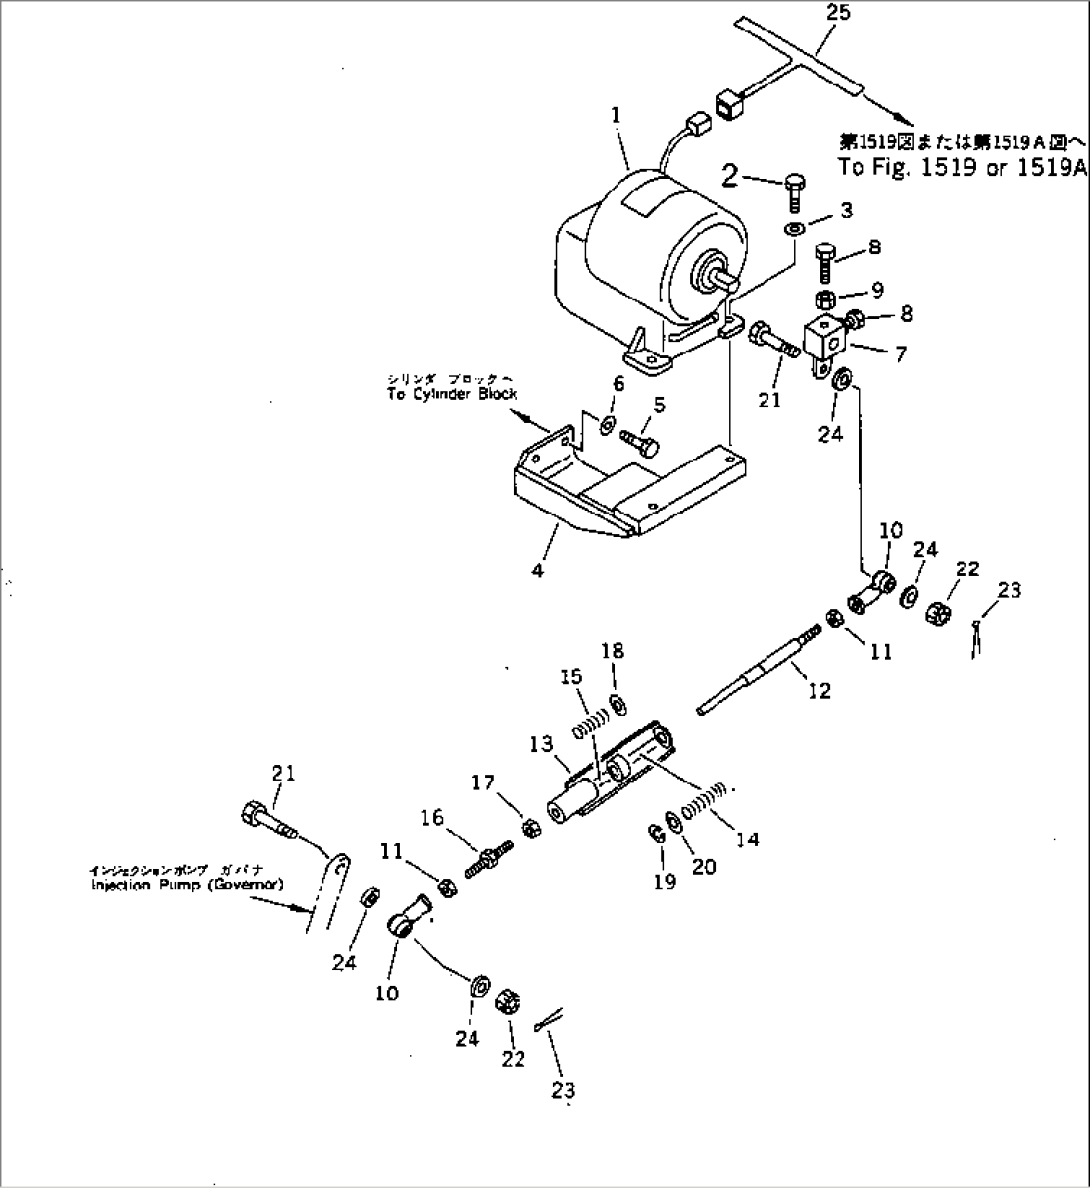 ELECTRICAL SYSTEM (ACCELERATOR)